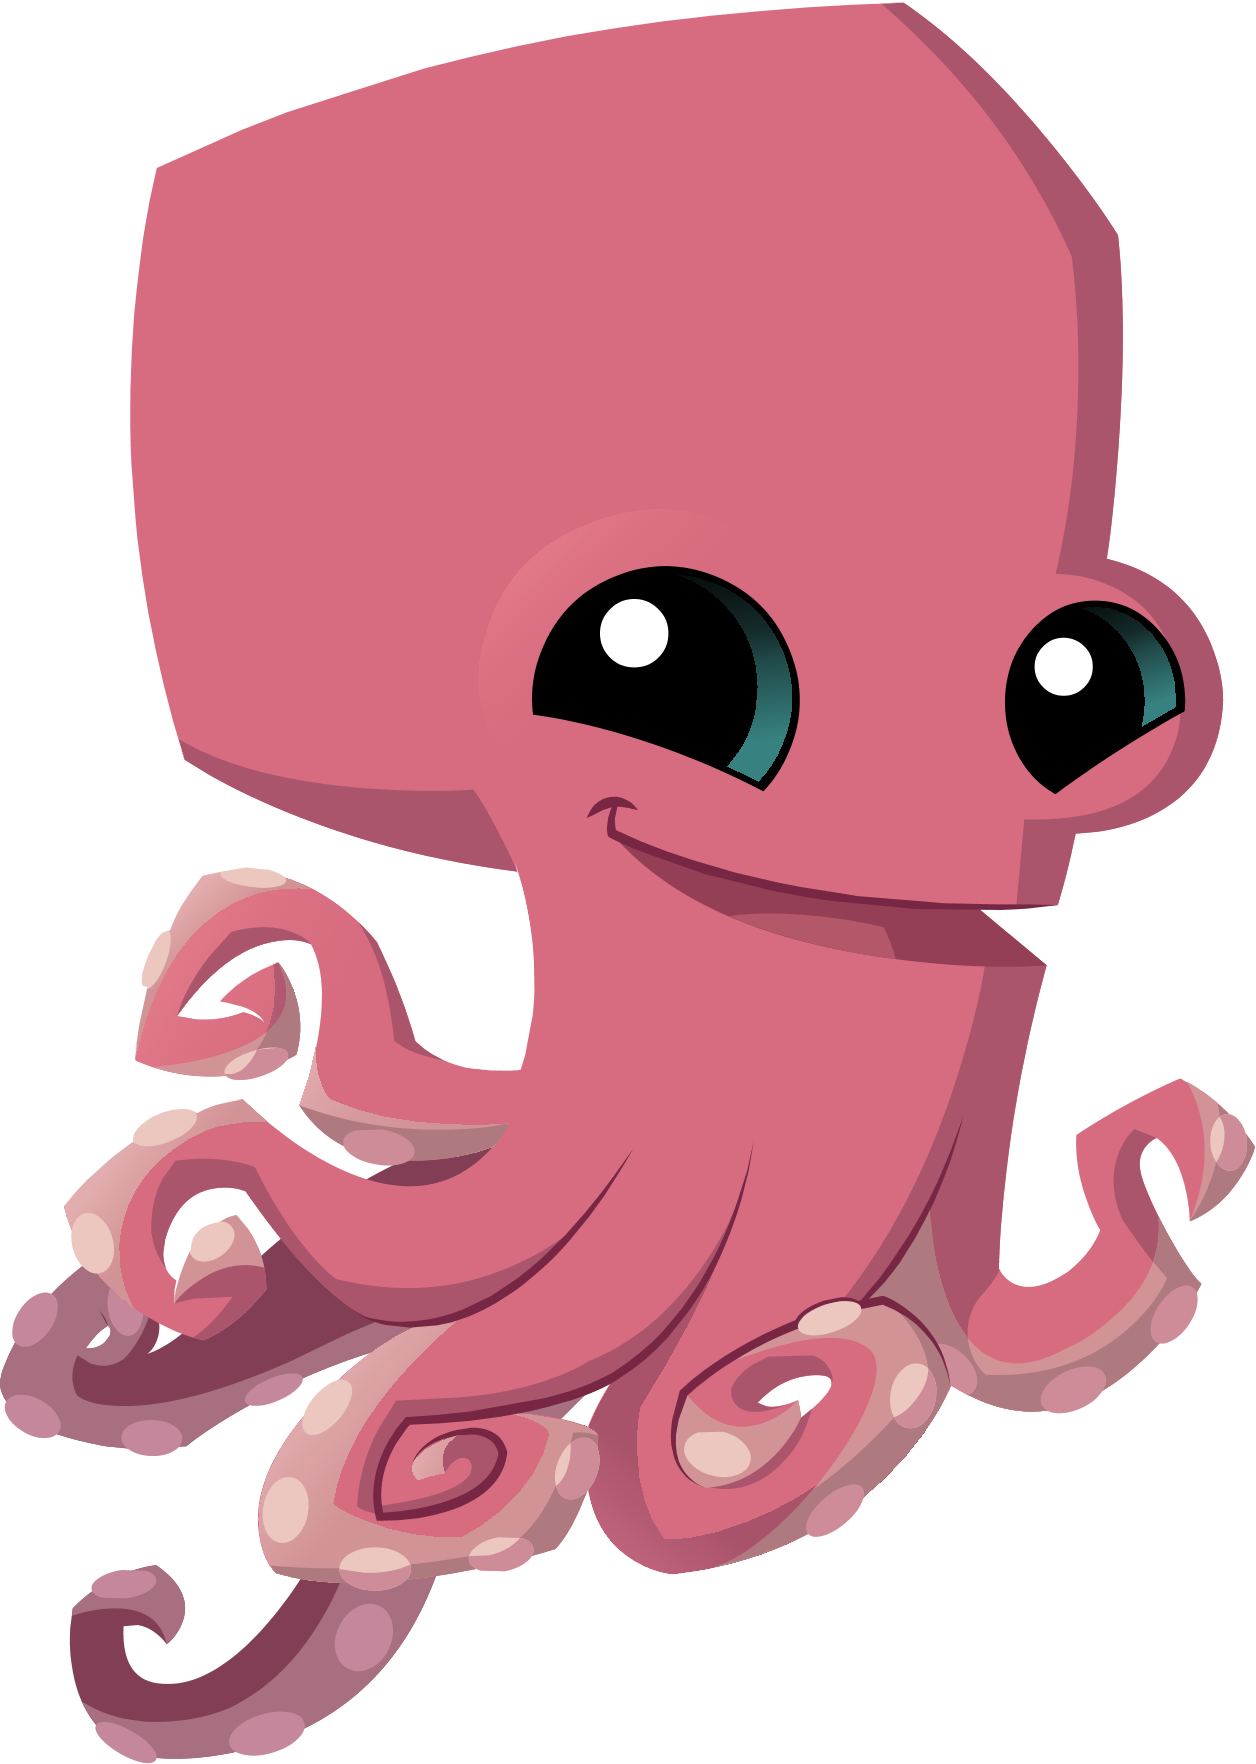 Octopus Images Free PNG HQ PNG Image